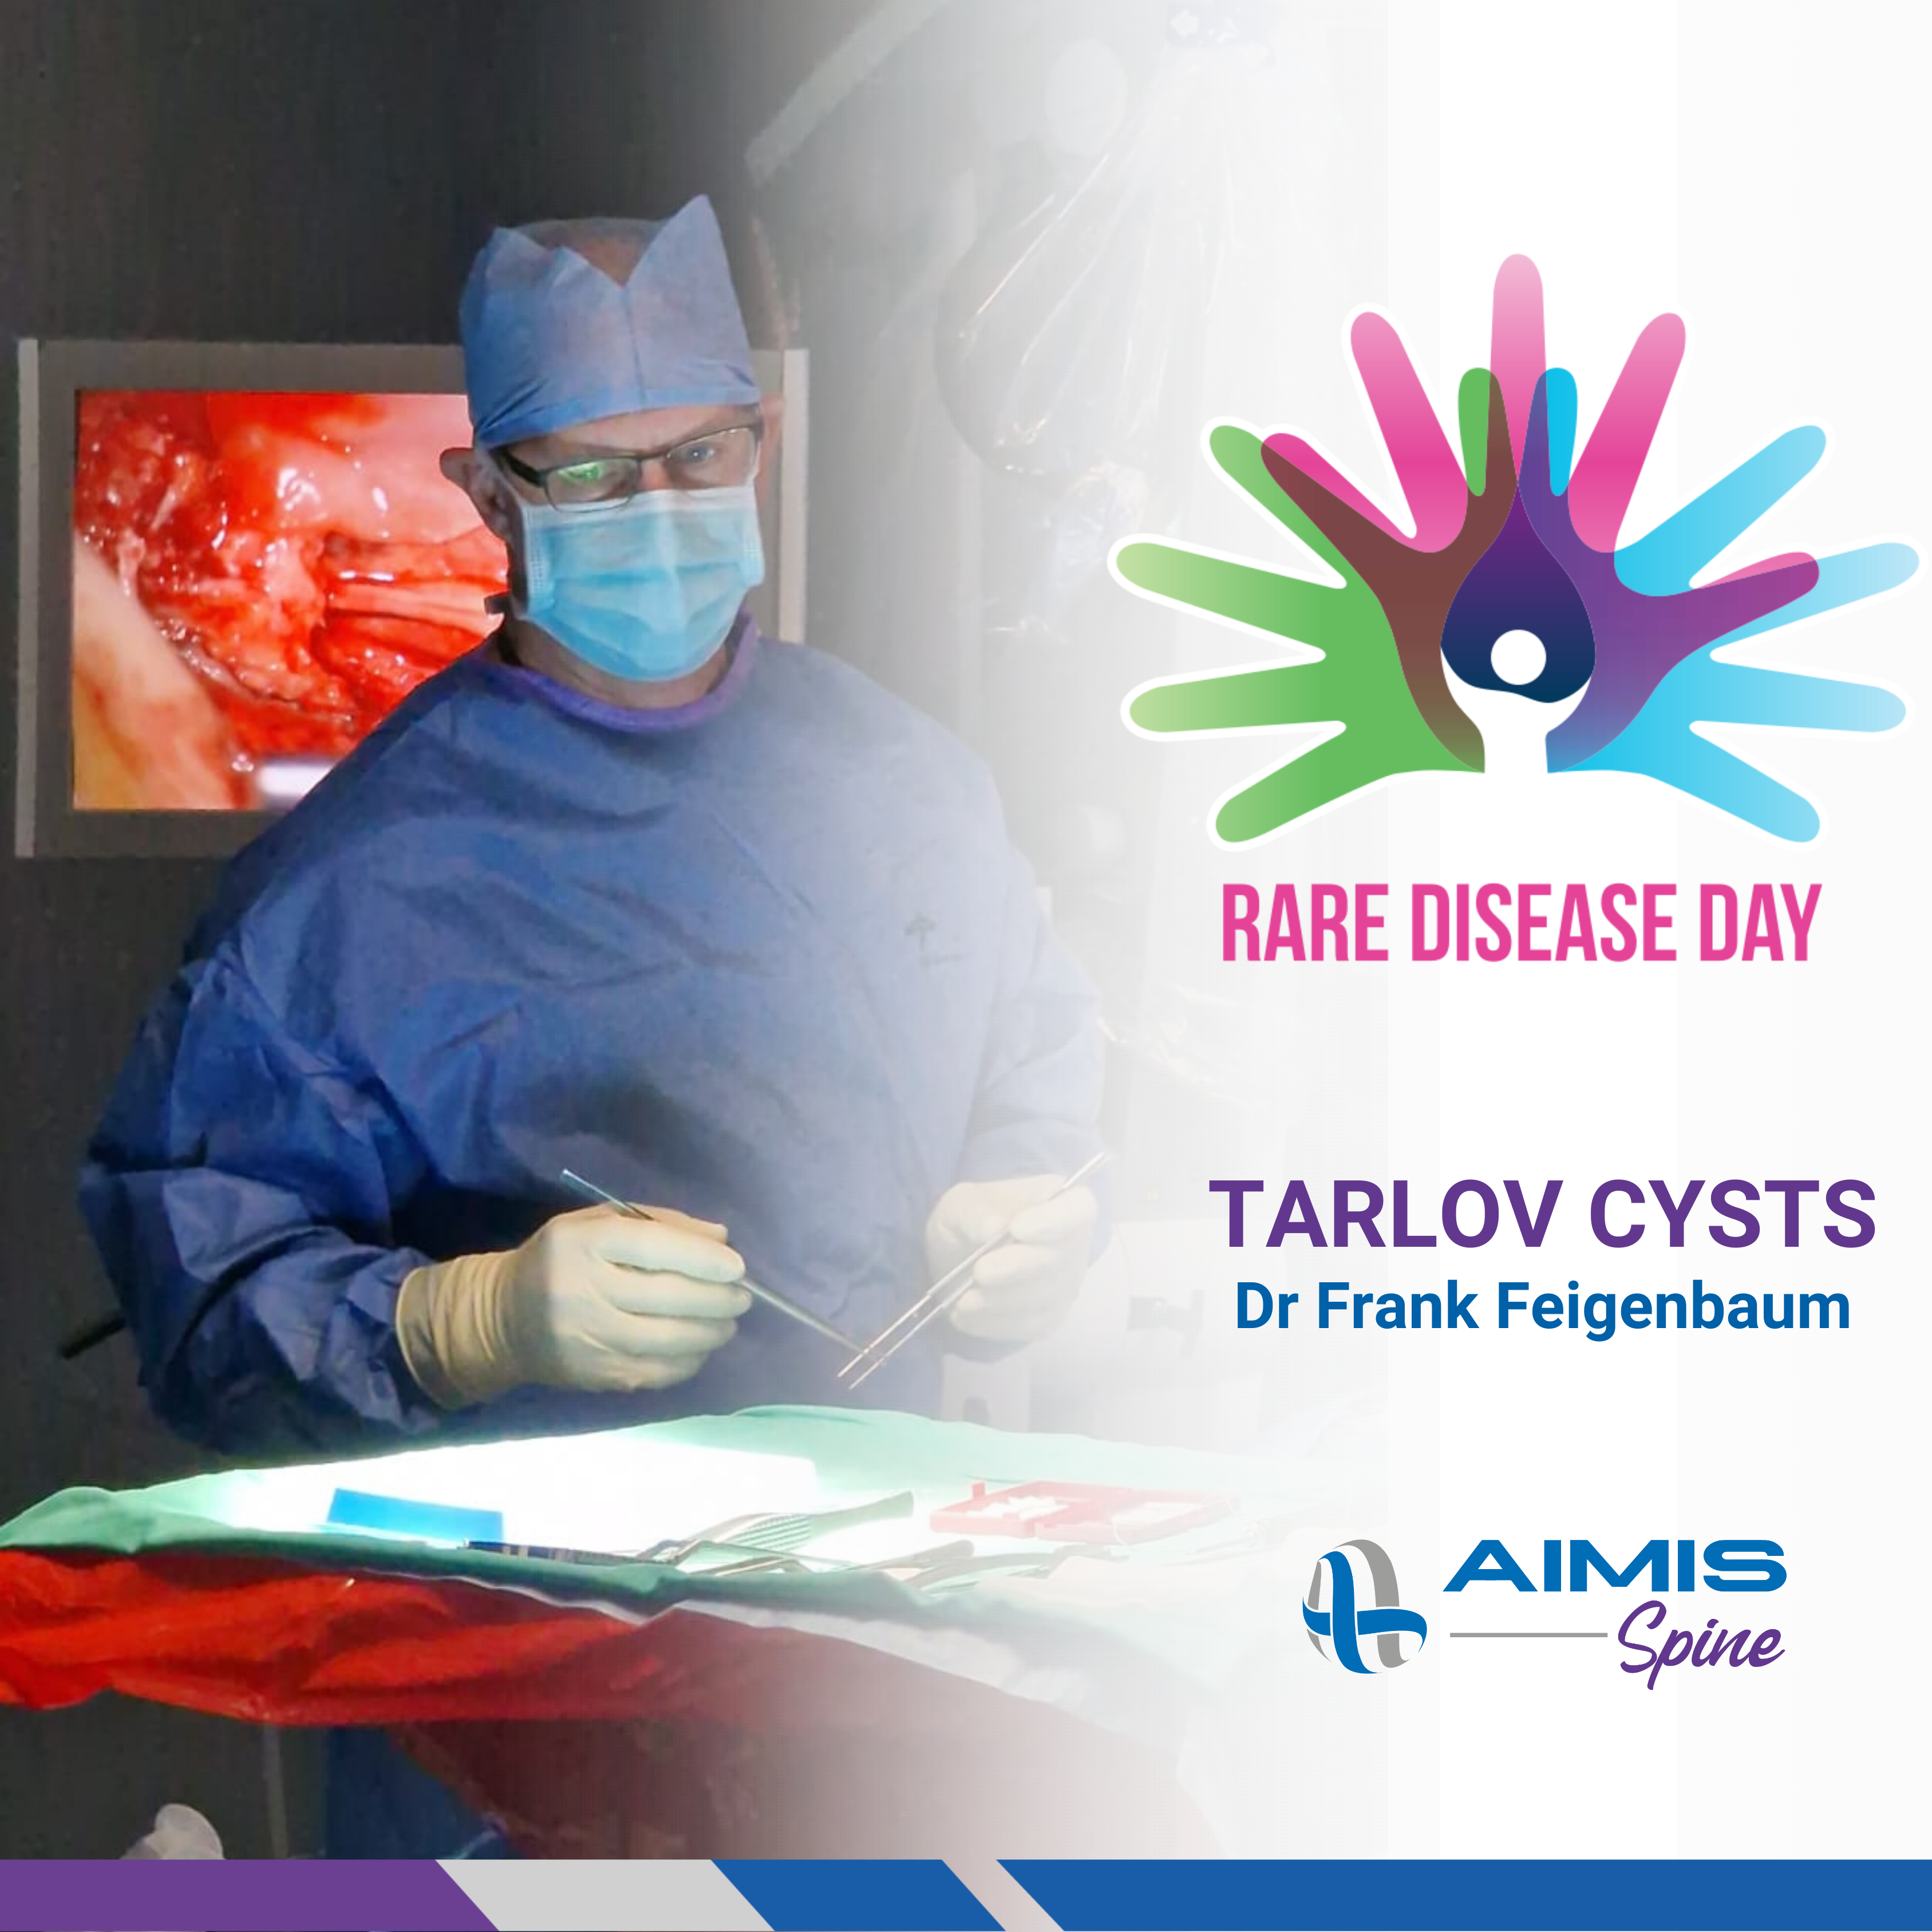 Uniting for Hope: International Rare Disease Day and the Journey with Tarlov Cysts